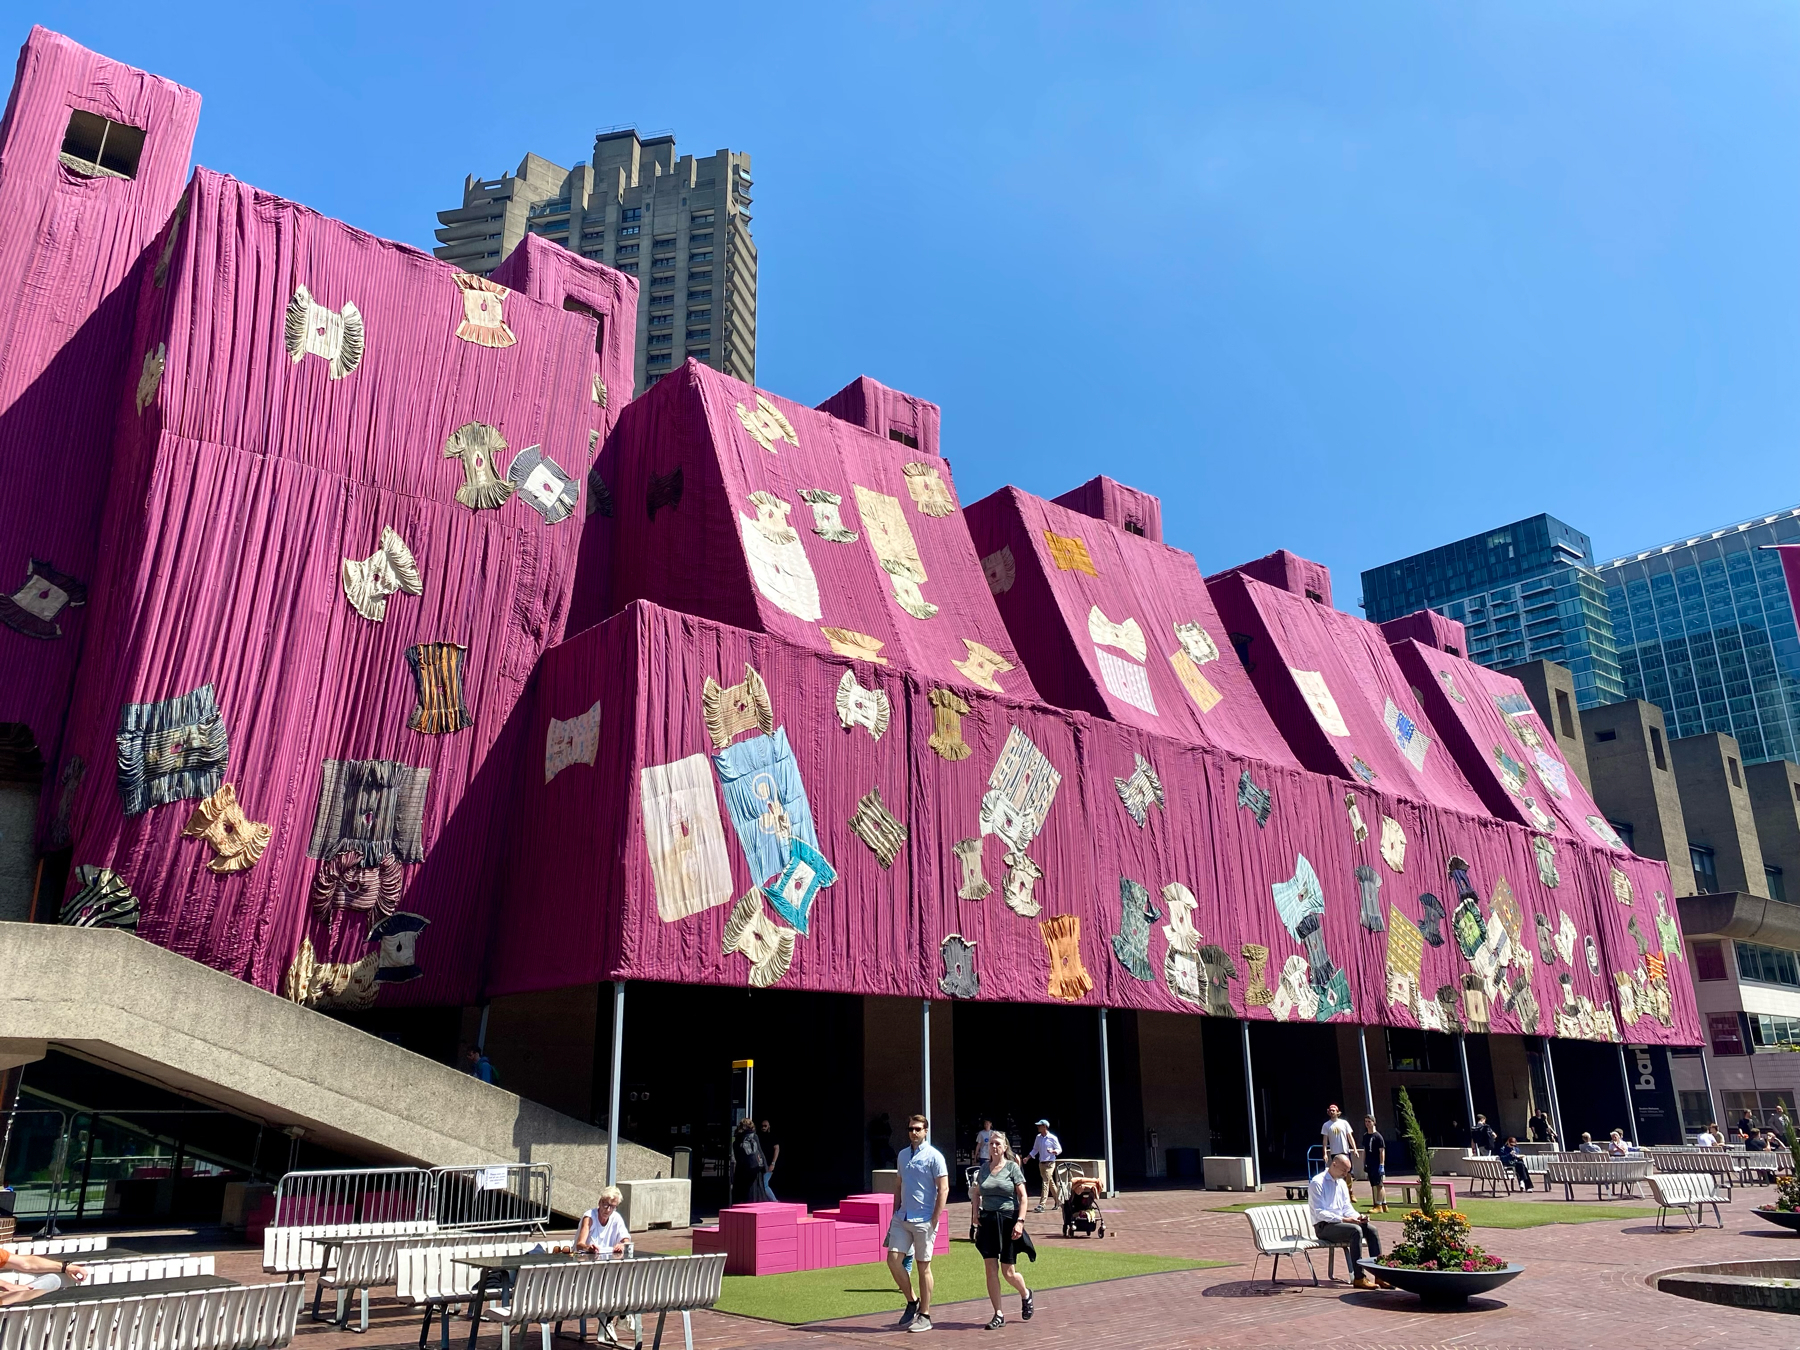 A large building is wrapped in magenta fabric adorned with various textile art pieces. The surrounding area features people walking, sitting on benches, and a few outdoor tables in a plaza on a sunny day. Modern skyscrapers are visible in the background.